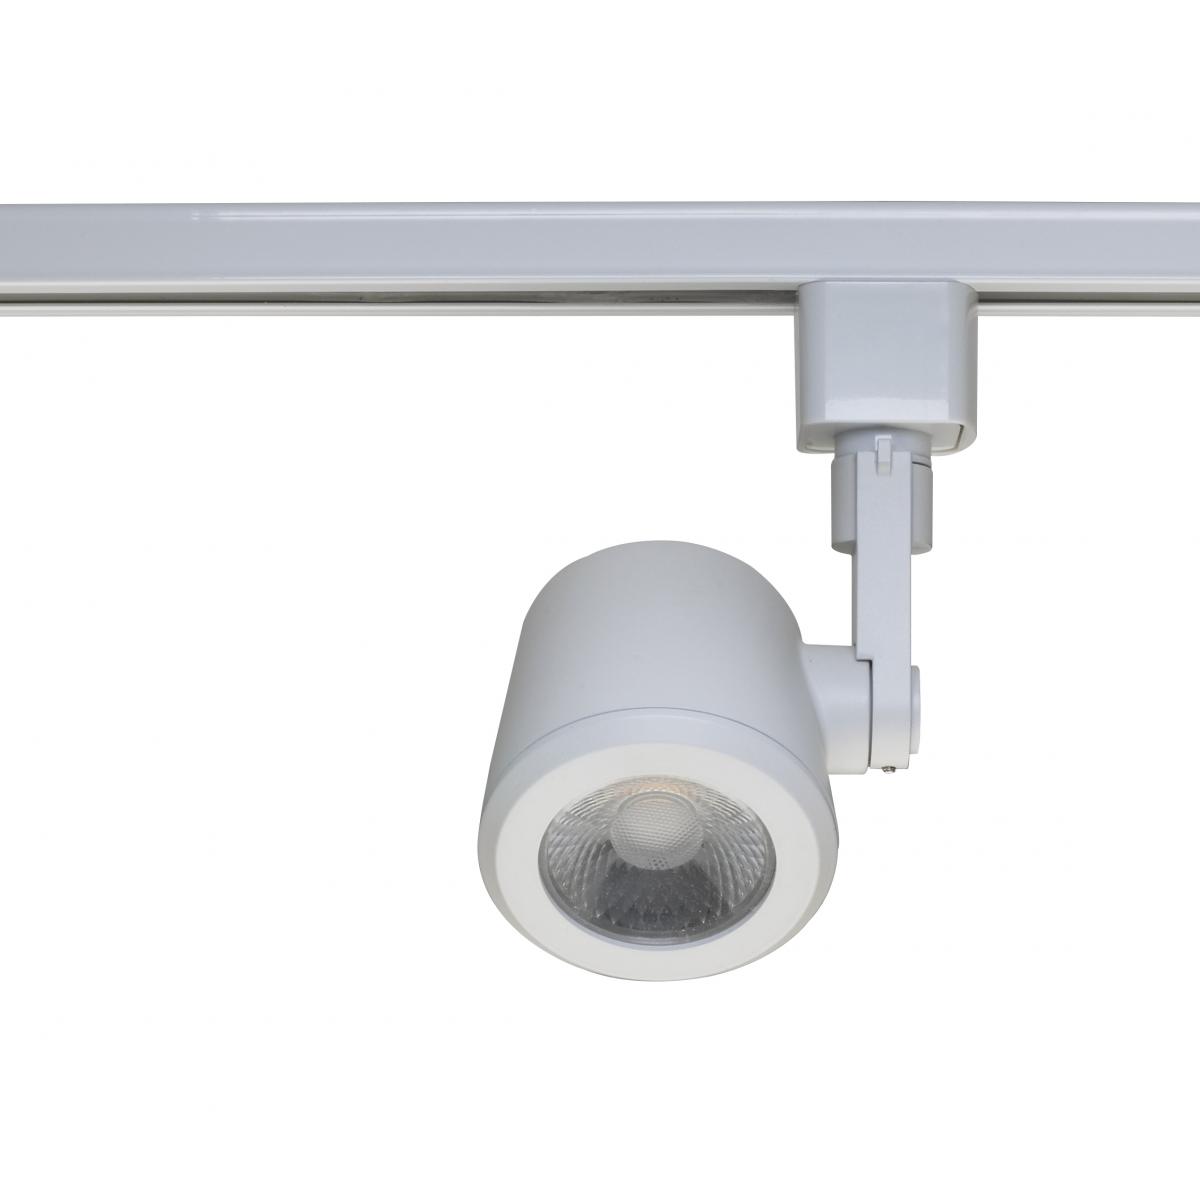 Taper Back Style LED Track Head Only  - White Finish - 24 Degree Beam - 1020 Lumens - 3000K Soft White - 12 Watt - Dimmable - 3 Contact Halo Style